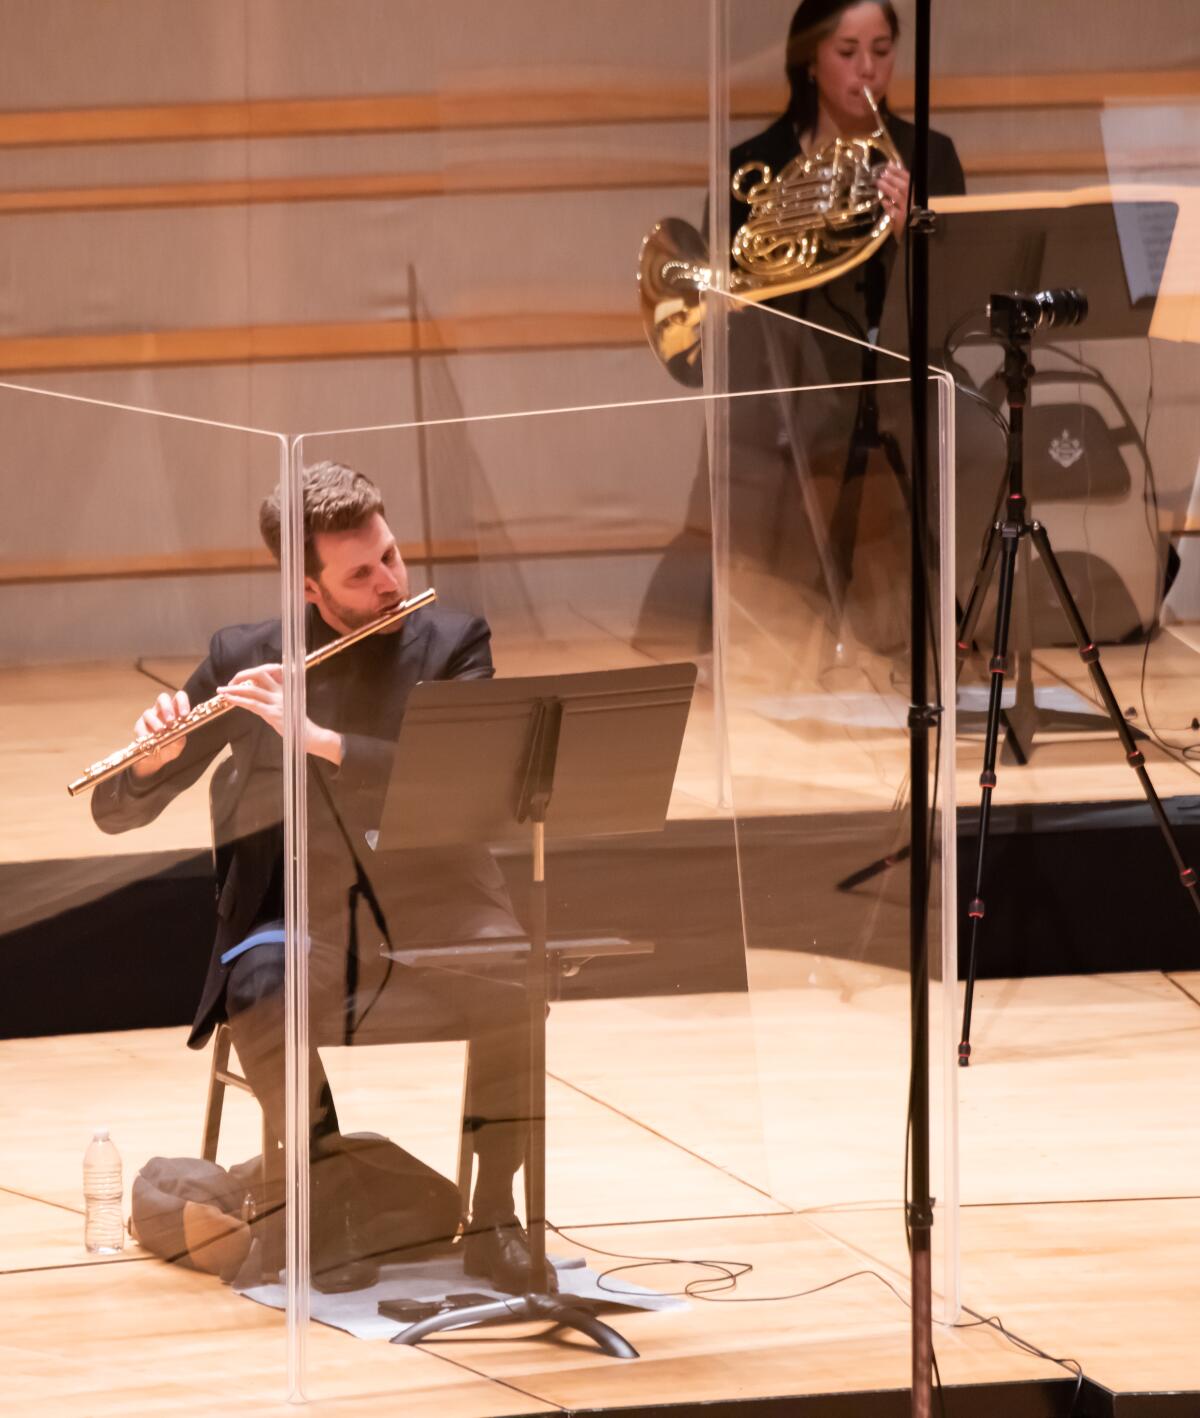 The brass and wind musicians of the Pacific Symphony perform encased by plexiglass.